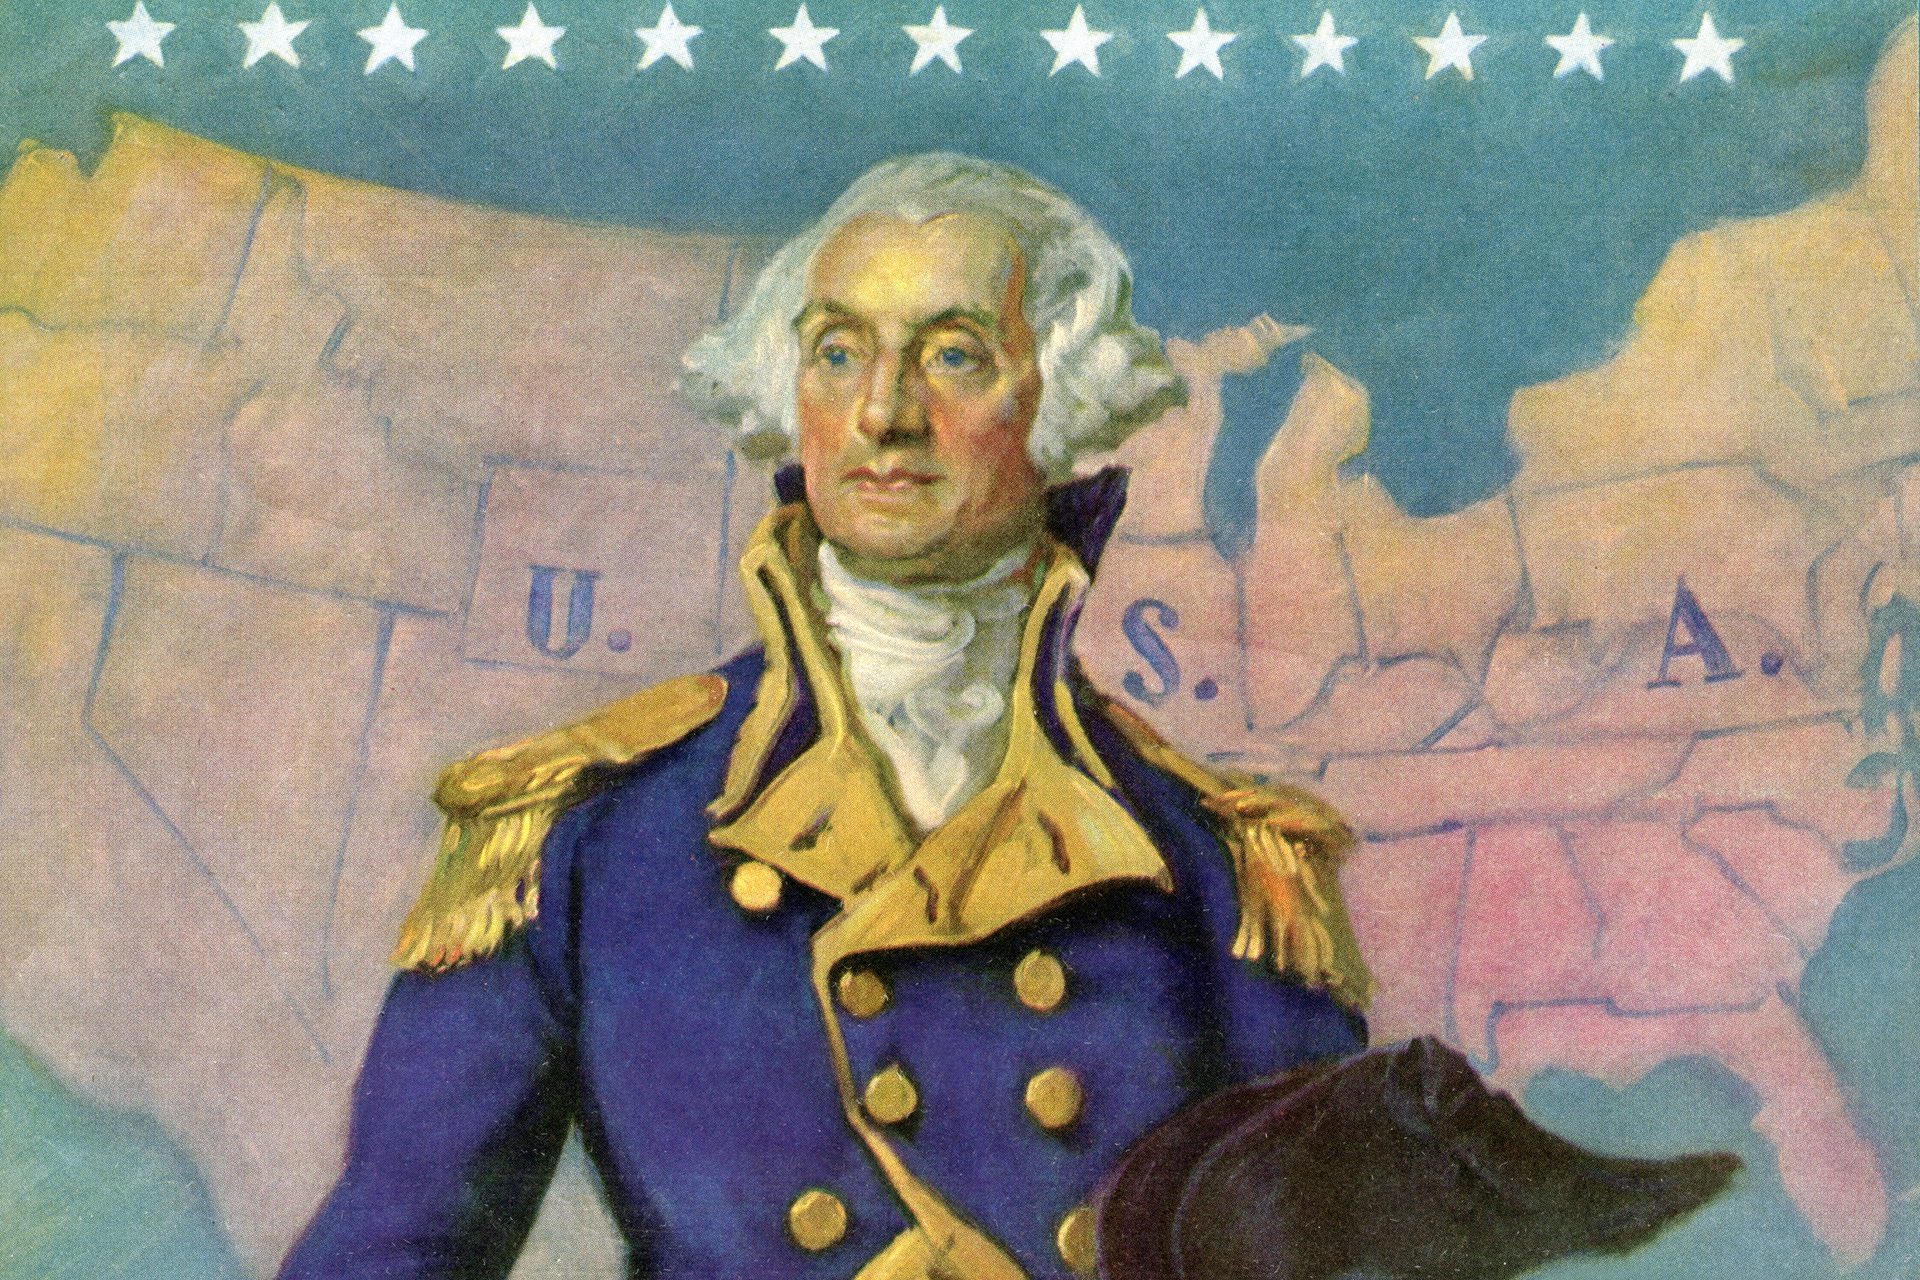 July 4th Fun: Strange, amusing, and interesting facts about US presidents